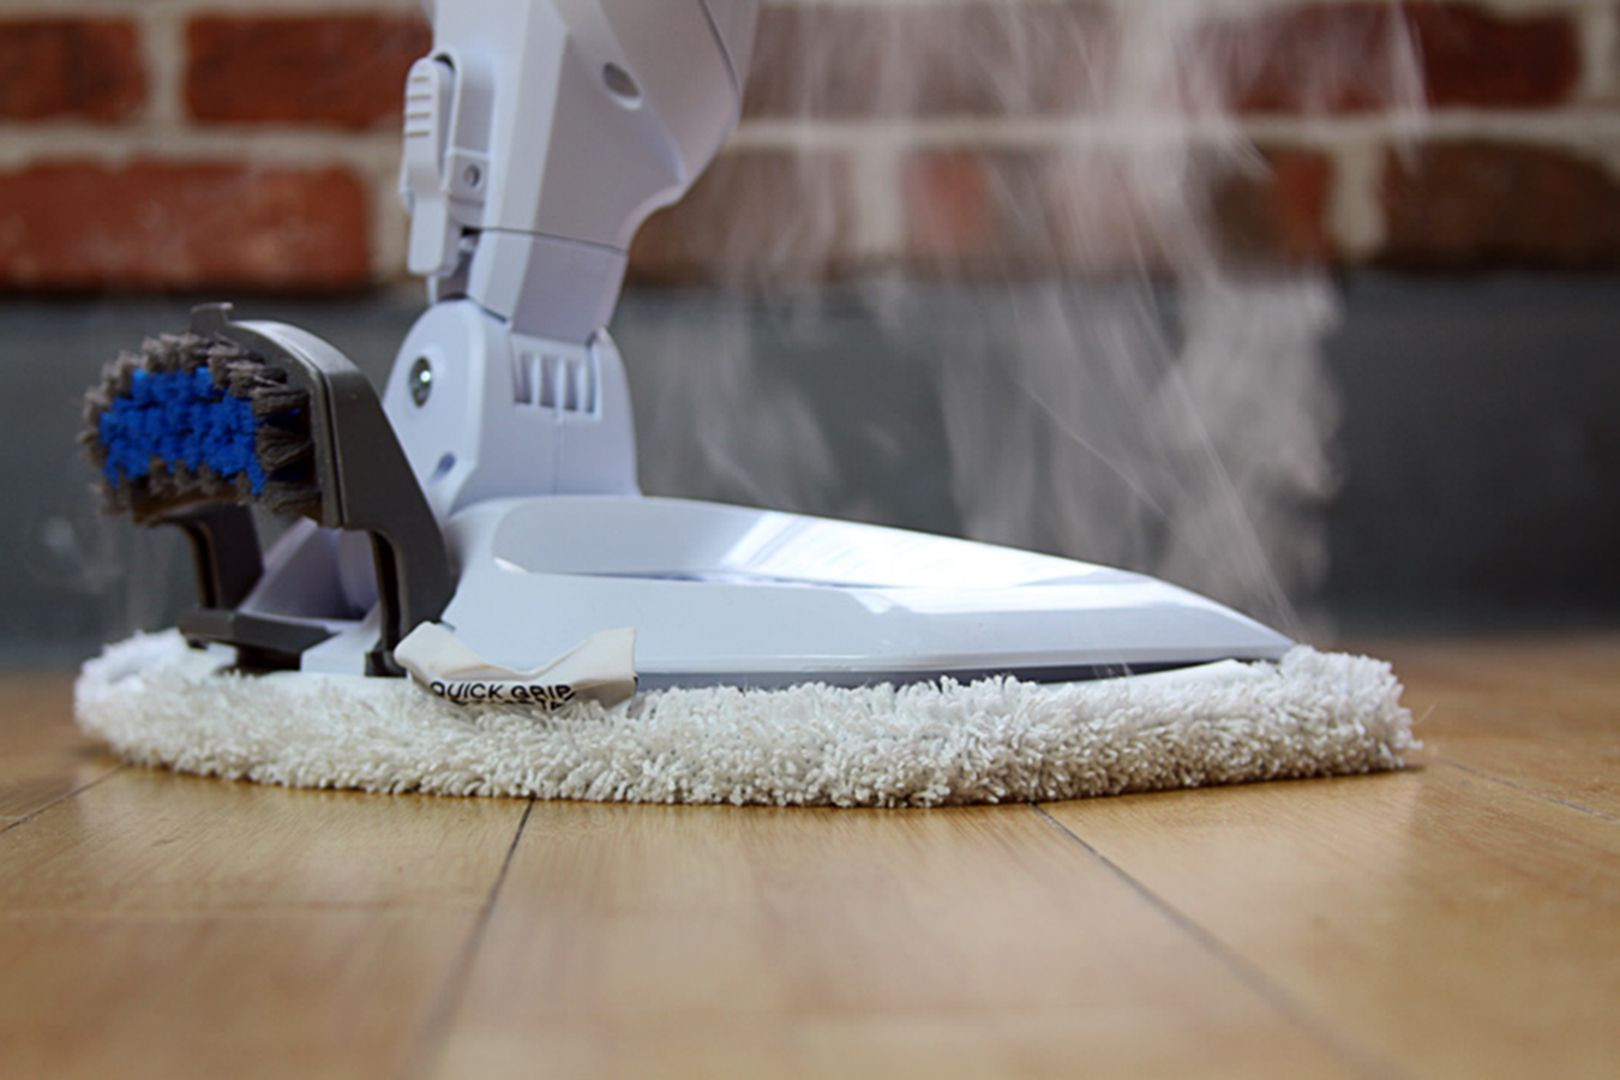 18 Wonderful How to Keep Hardwood Floors Shiny 2024 free download how to keep hardwood floors shiny of use a steam mop efficiently if you want clean floors intended for steam mop 33683344996 29f26c2761 o 58f116ab3df78cd3fc1c2c16